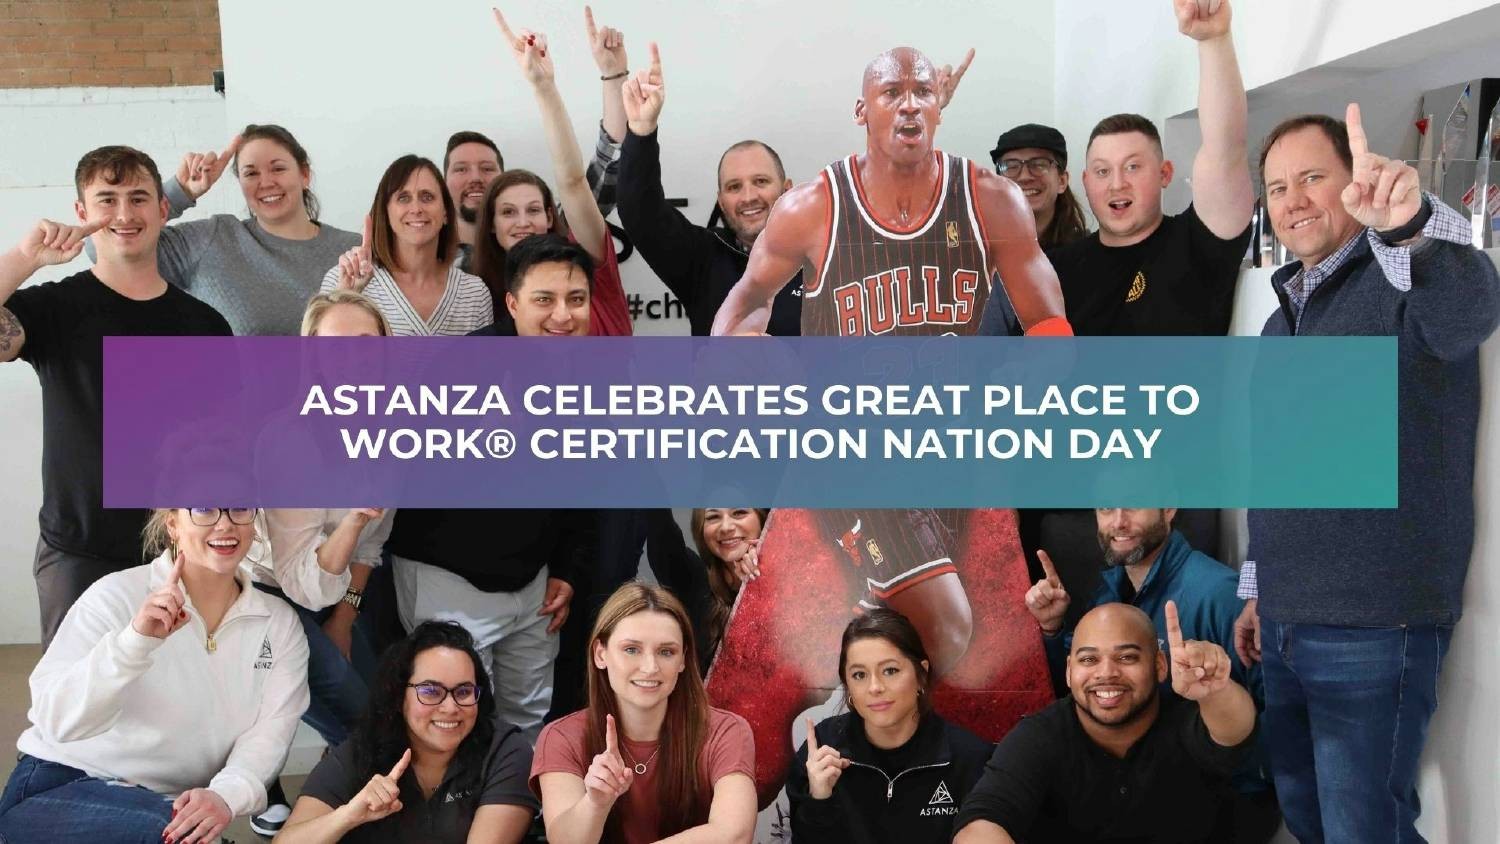 ASTANZA CELEBRATES GREAT PLACES TO WORK® CERTIFICATION NATION DAY
